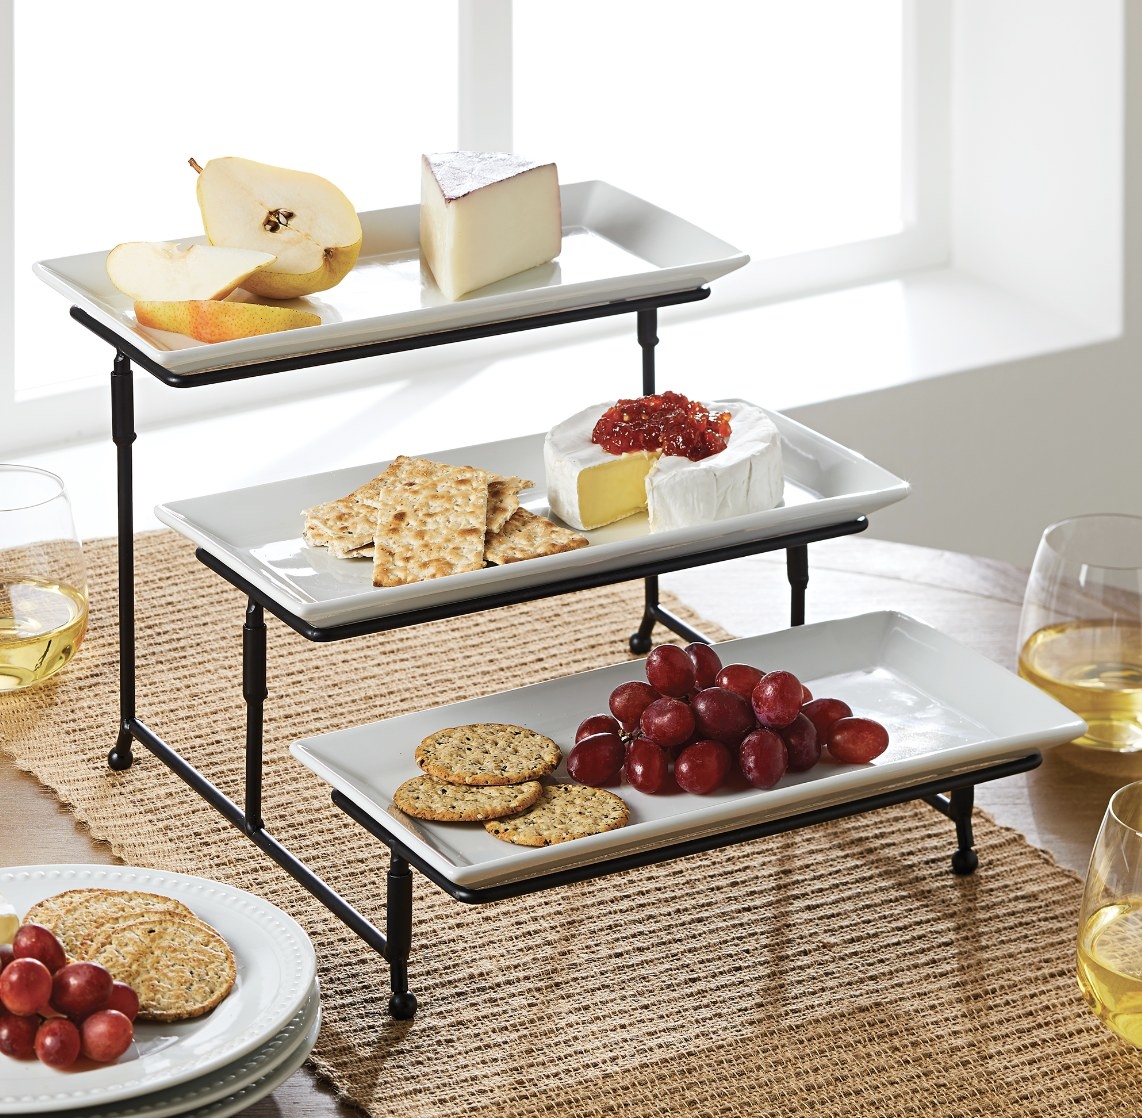 The white porcelain trays are staggered on a black metal frame and are holding fruit, cheese and crackers